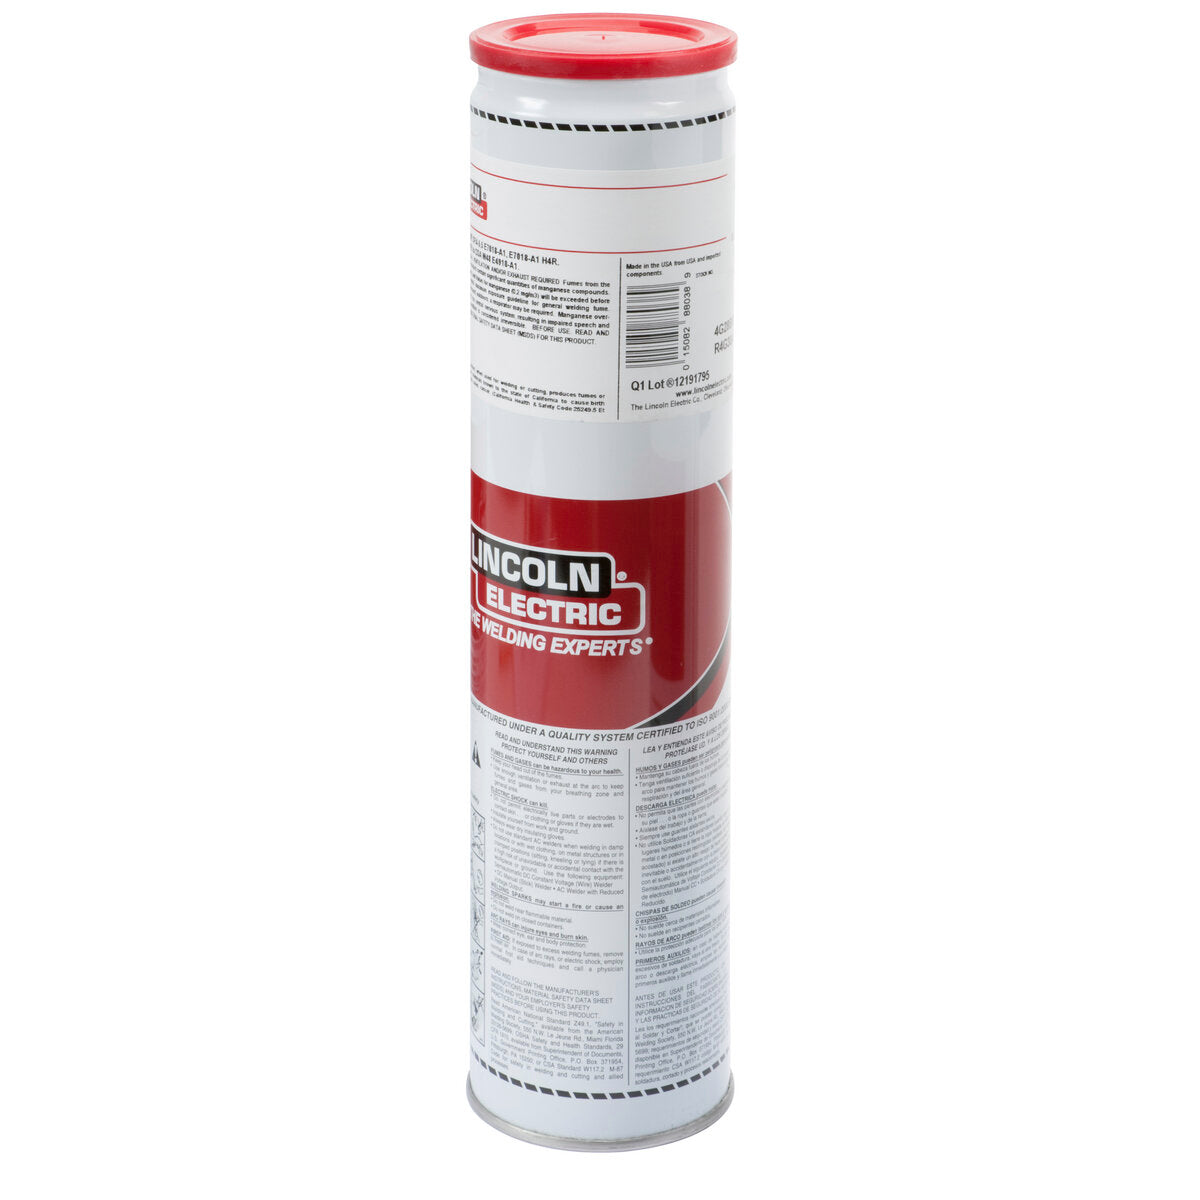 Lincoln Electric - Excalibur® 9018-B3 MR® Stick (SMAW) Electrode, 3/32x12 in, (3) 8 lb Easy Open Can - ED032884